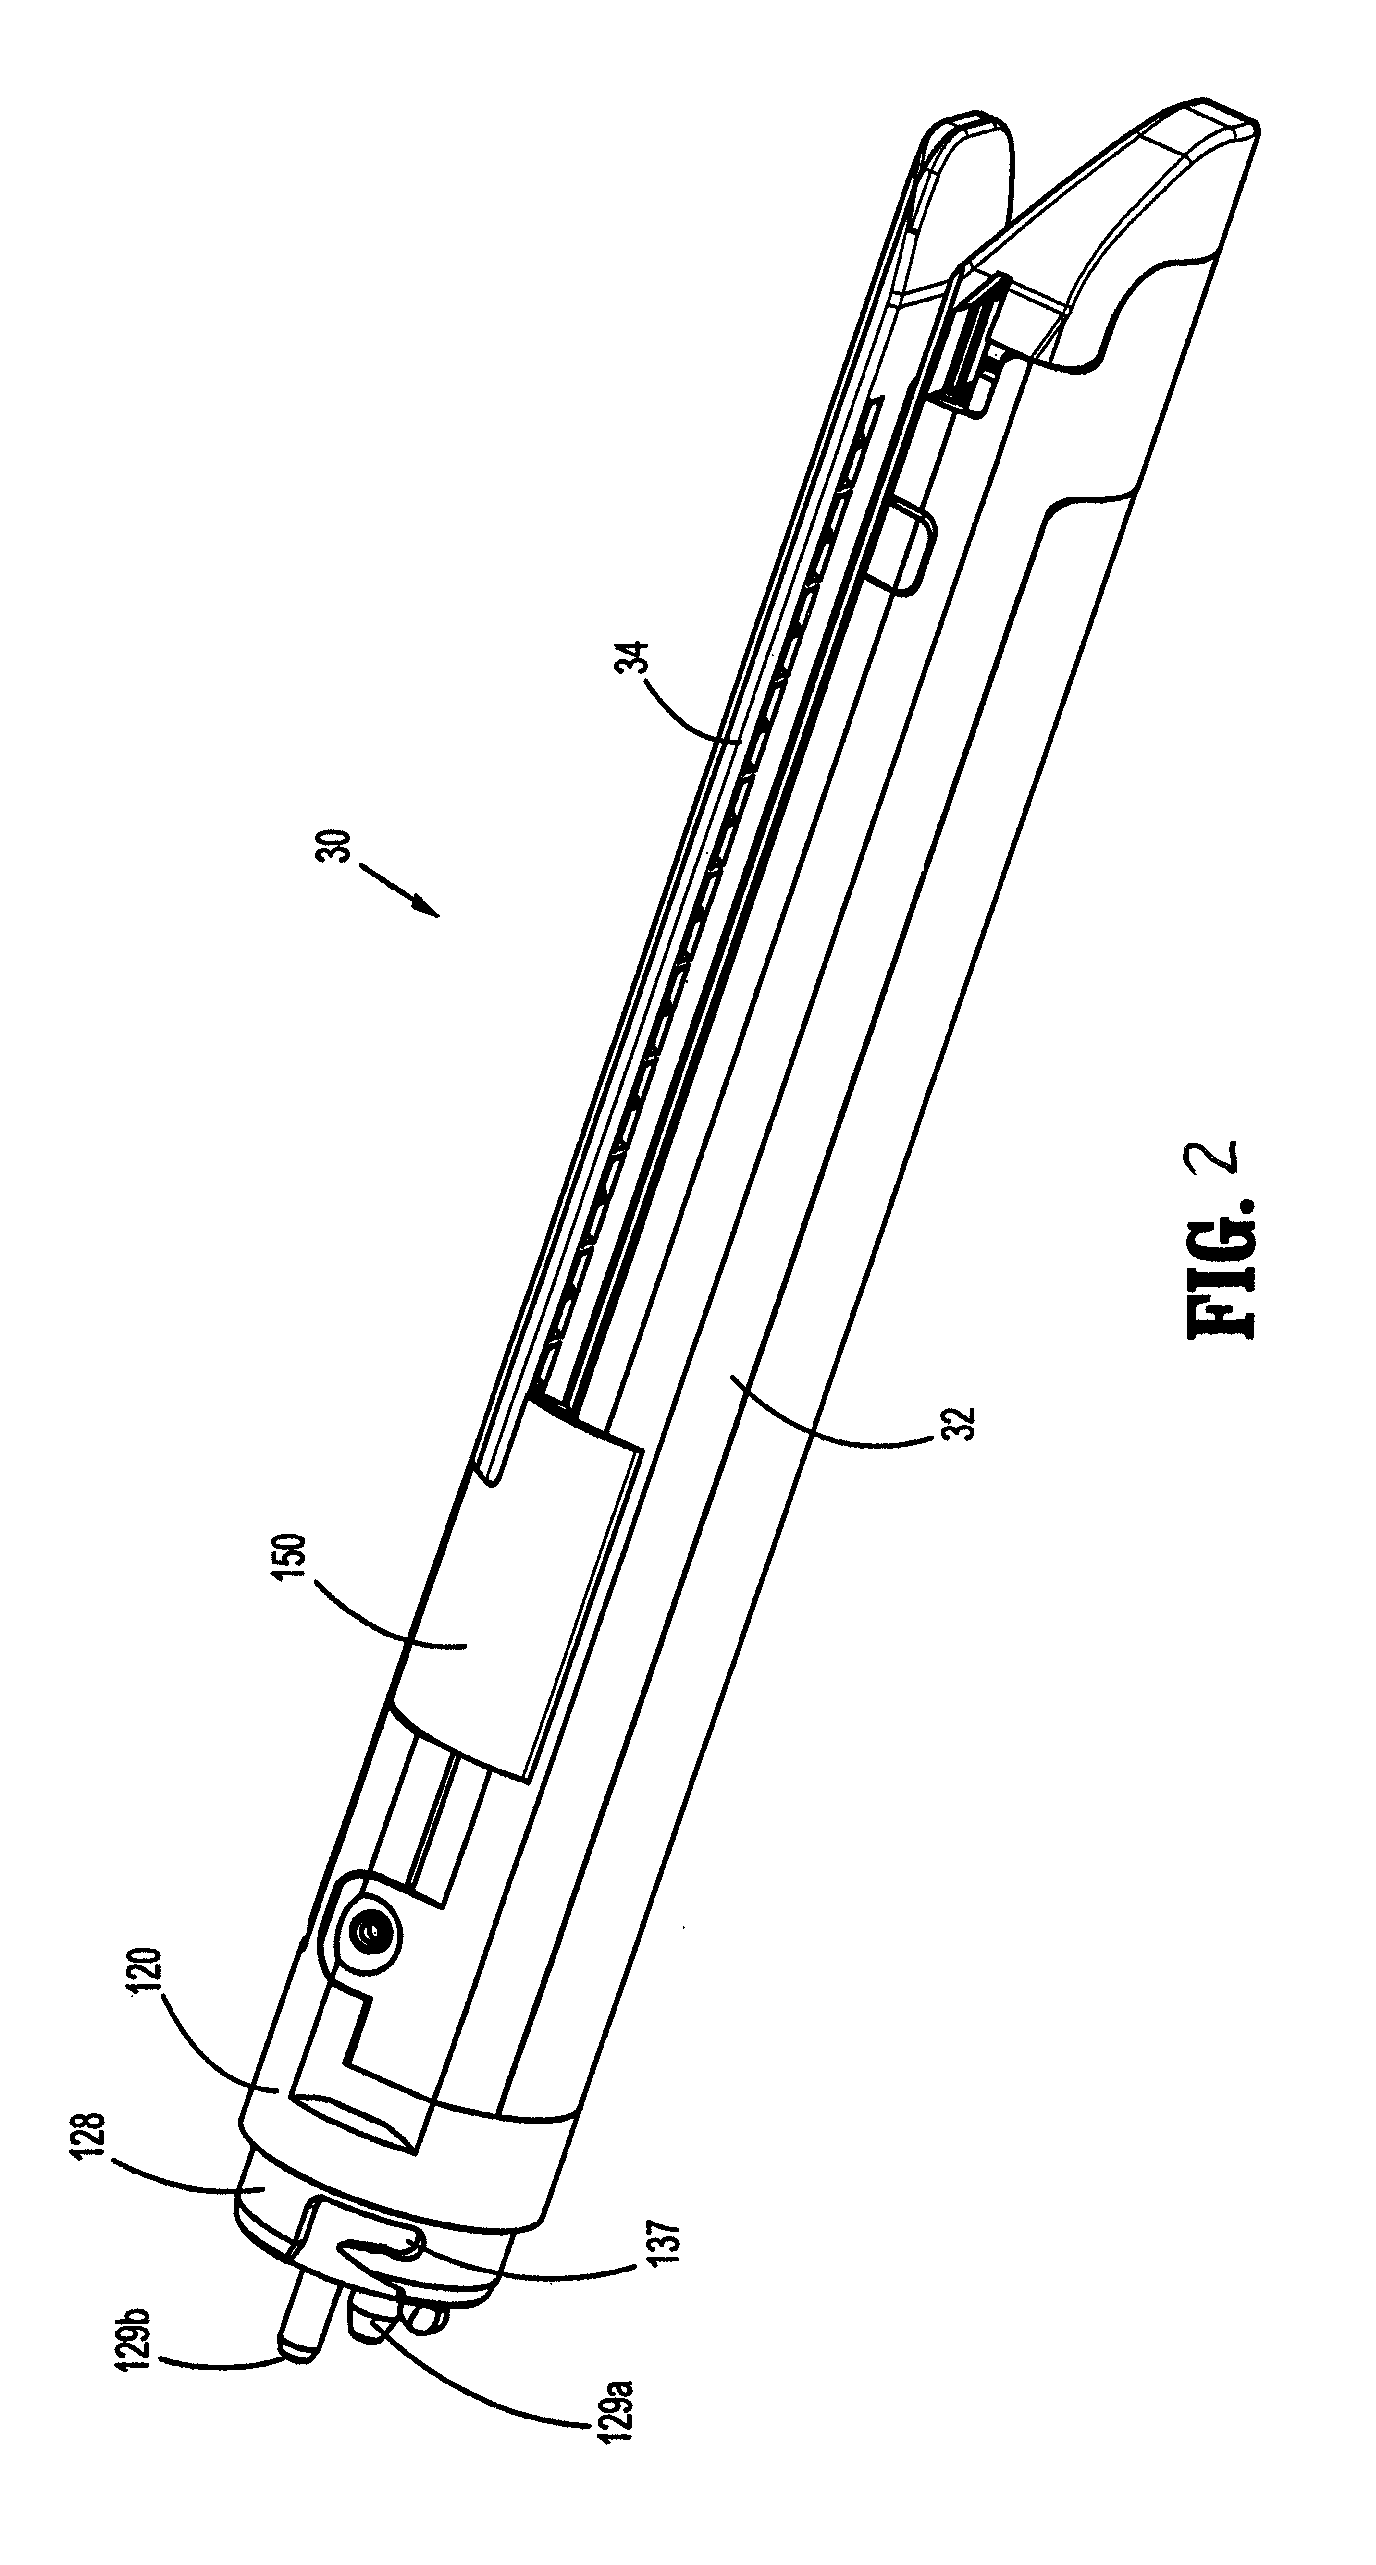 Surgical apparatus and method for endoscopic surgery